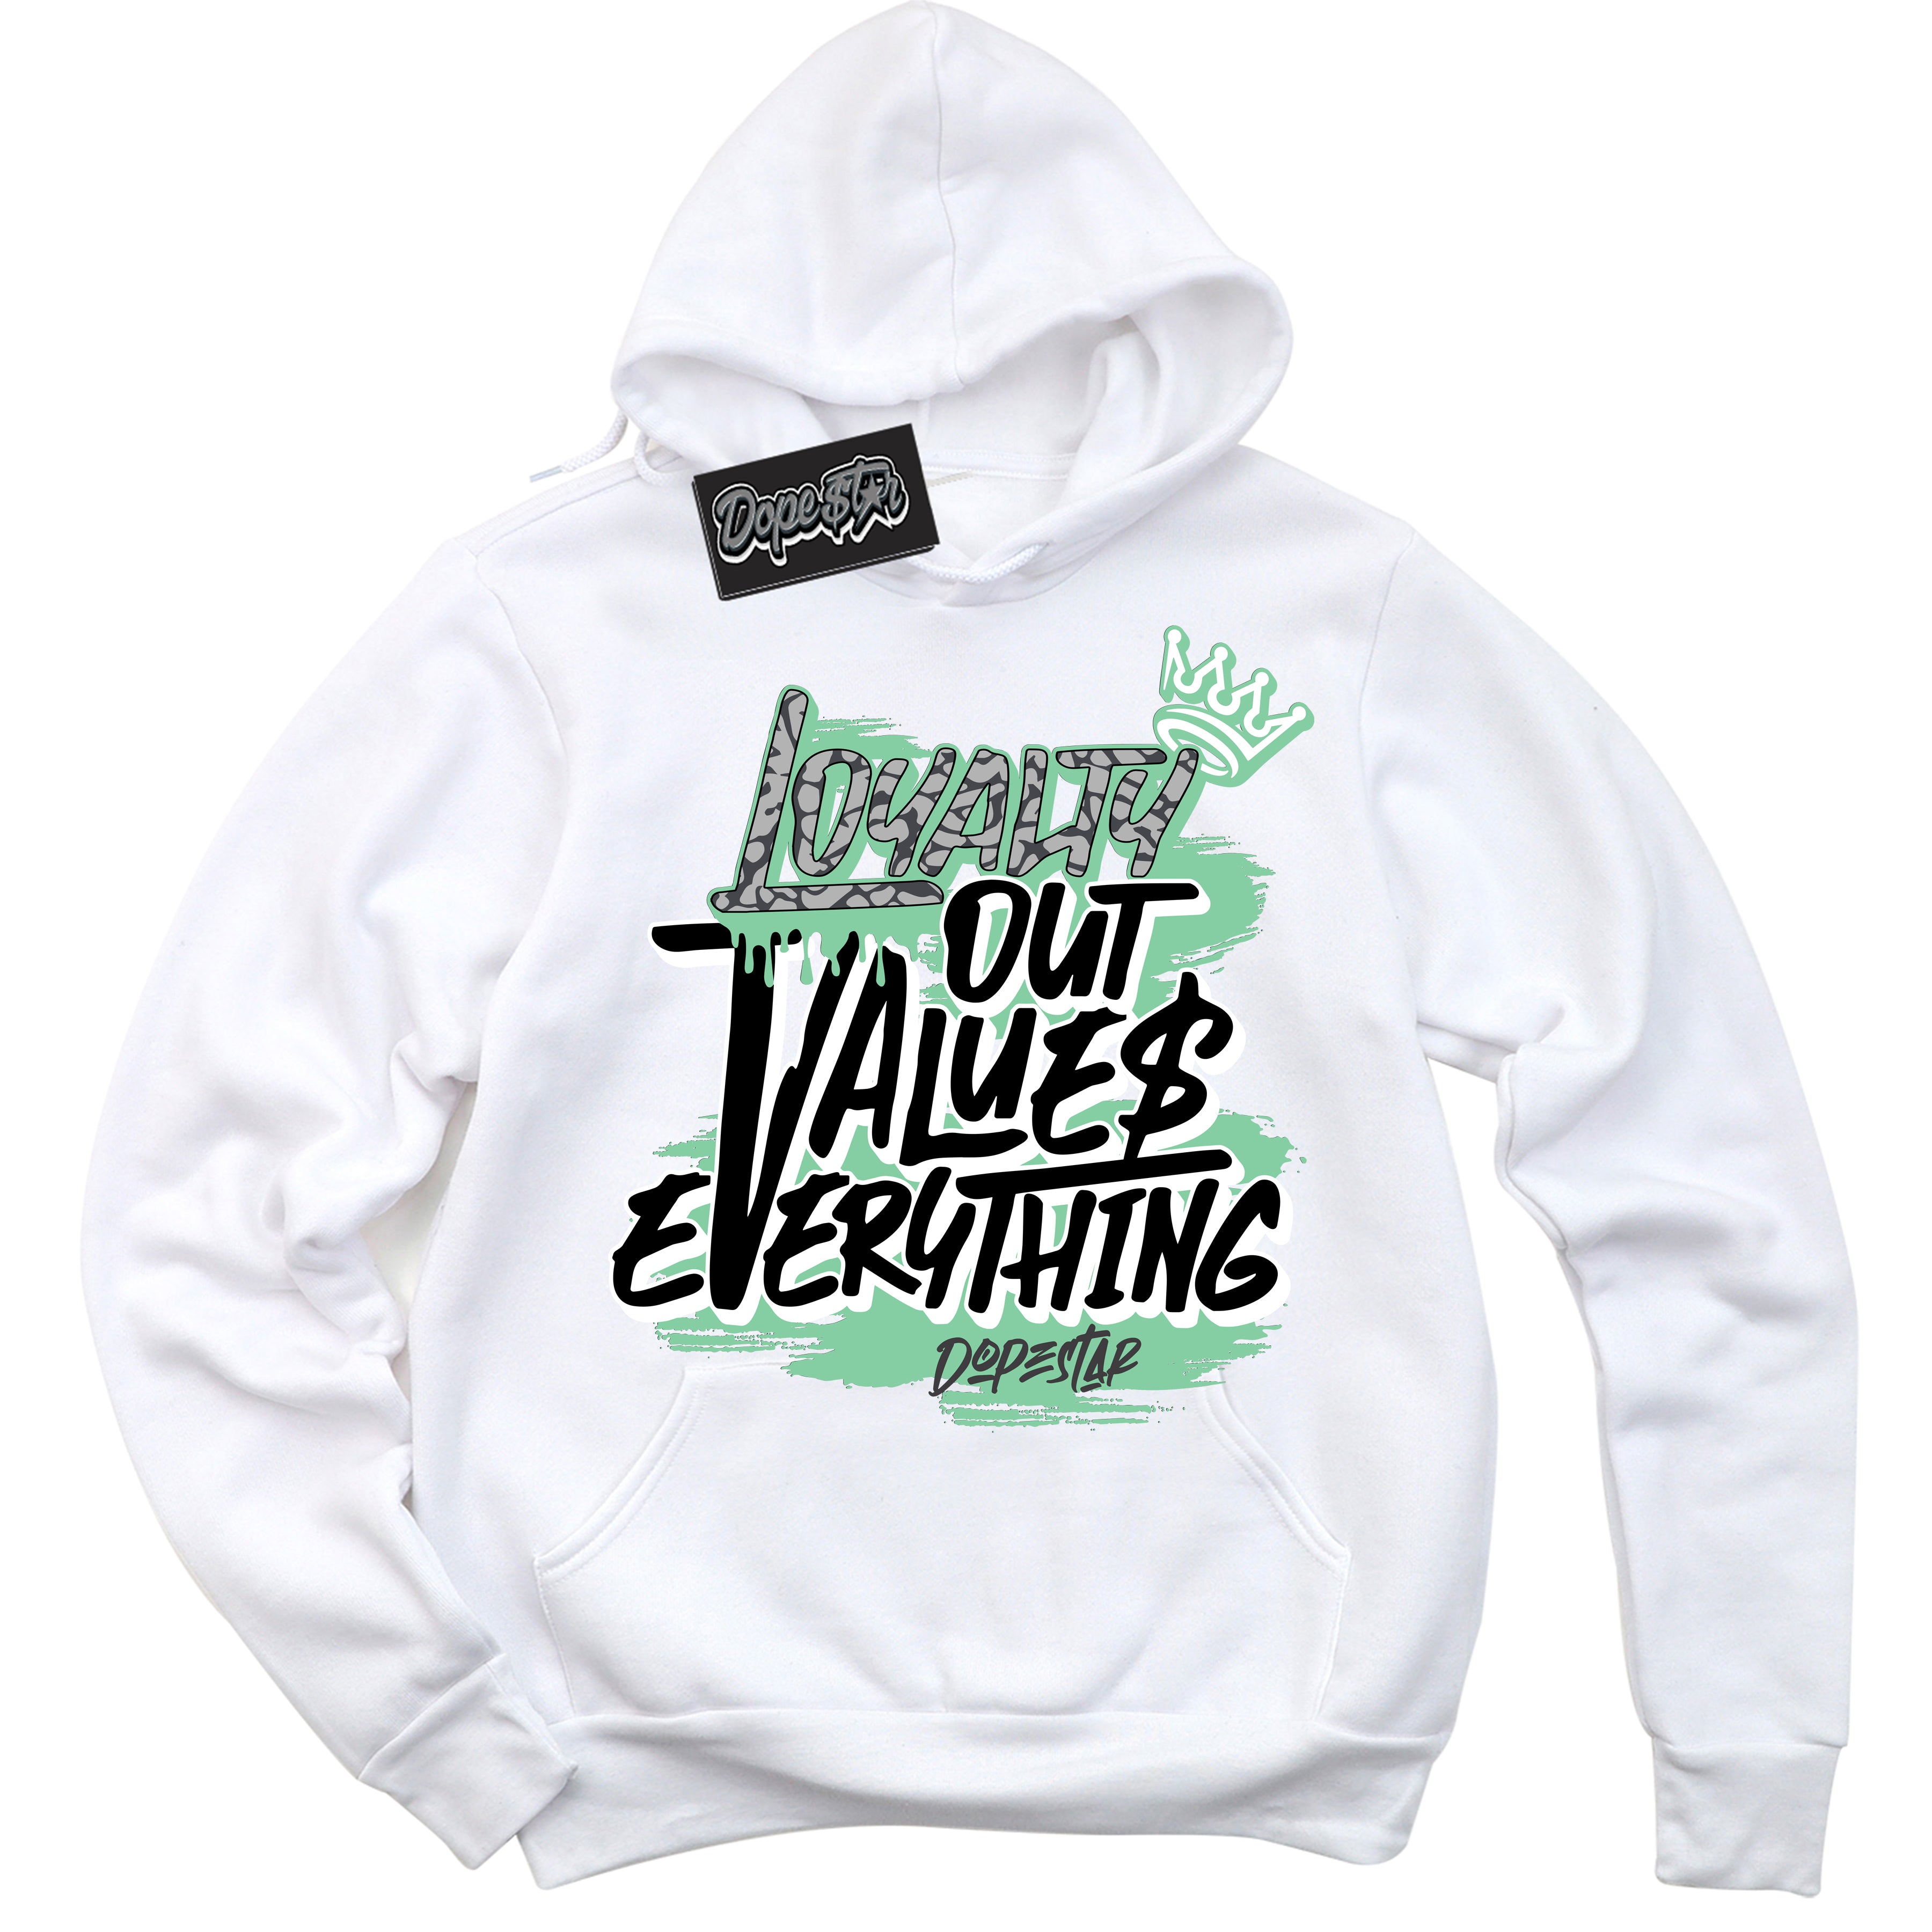 Cool White Hoodie with “ Loyalty Out Values Everything ”  design that Perfectly Matches Green Glow 3s Sneakers.